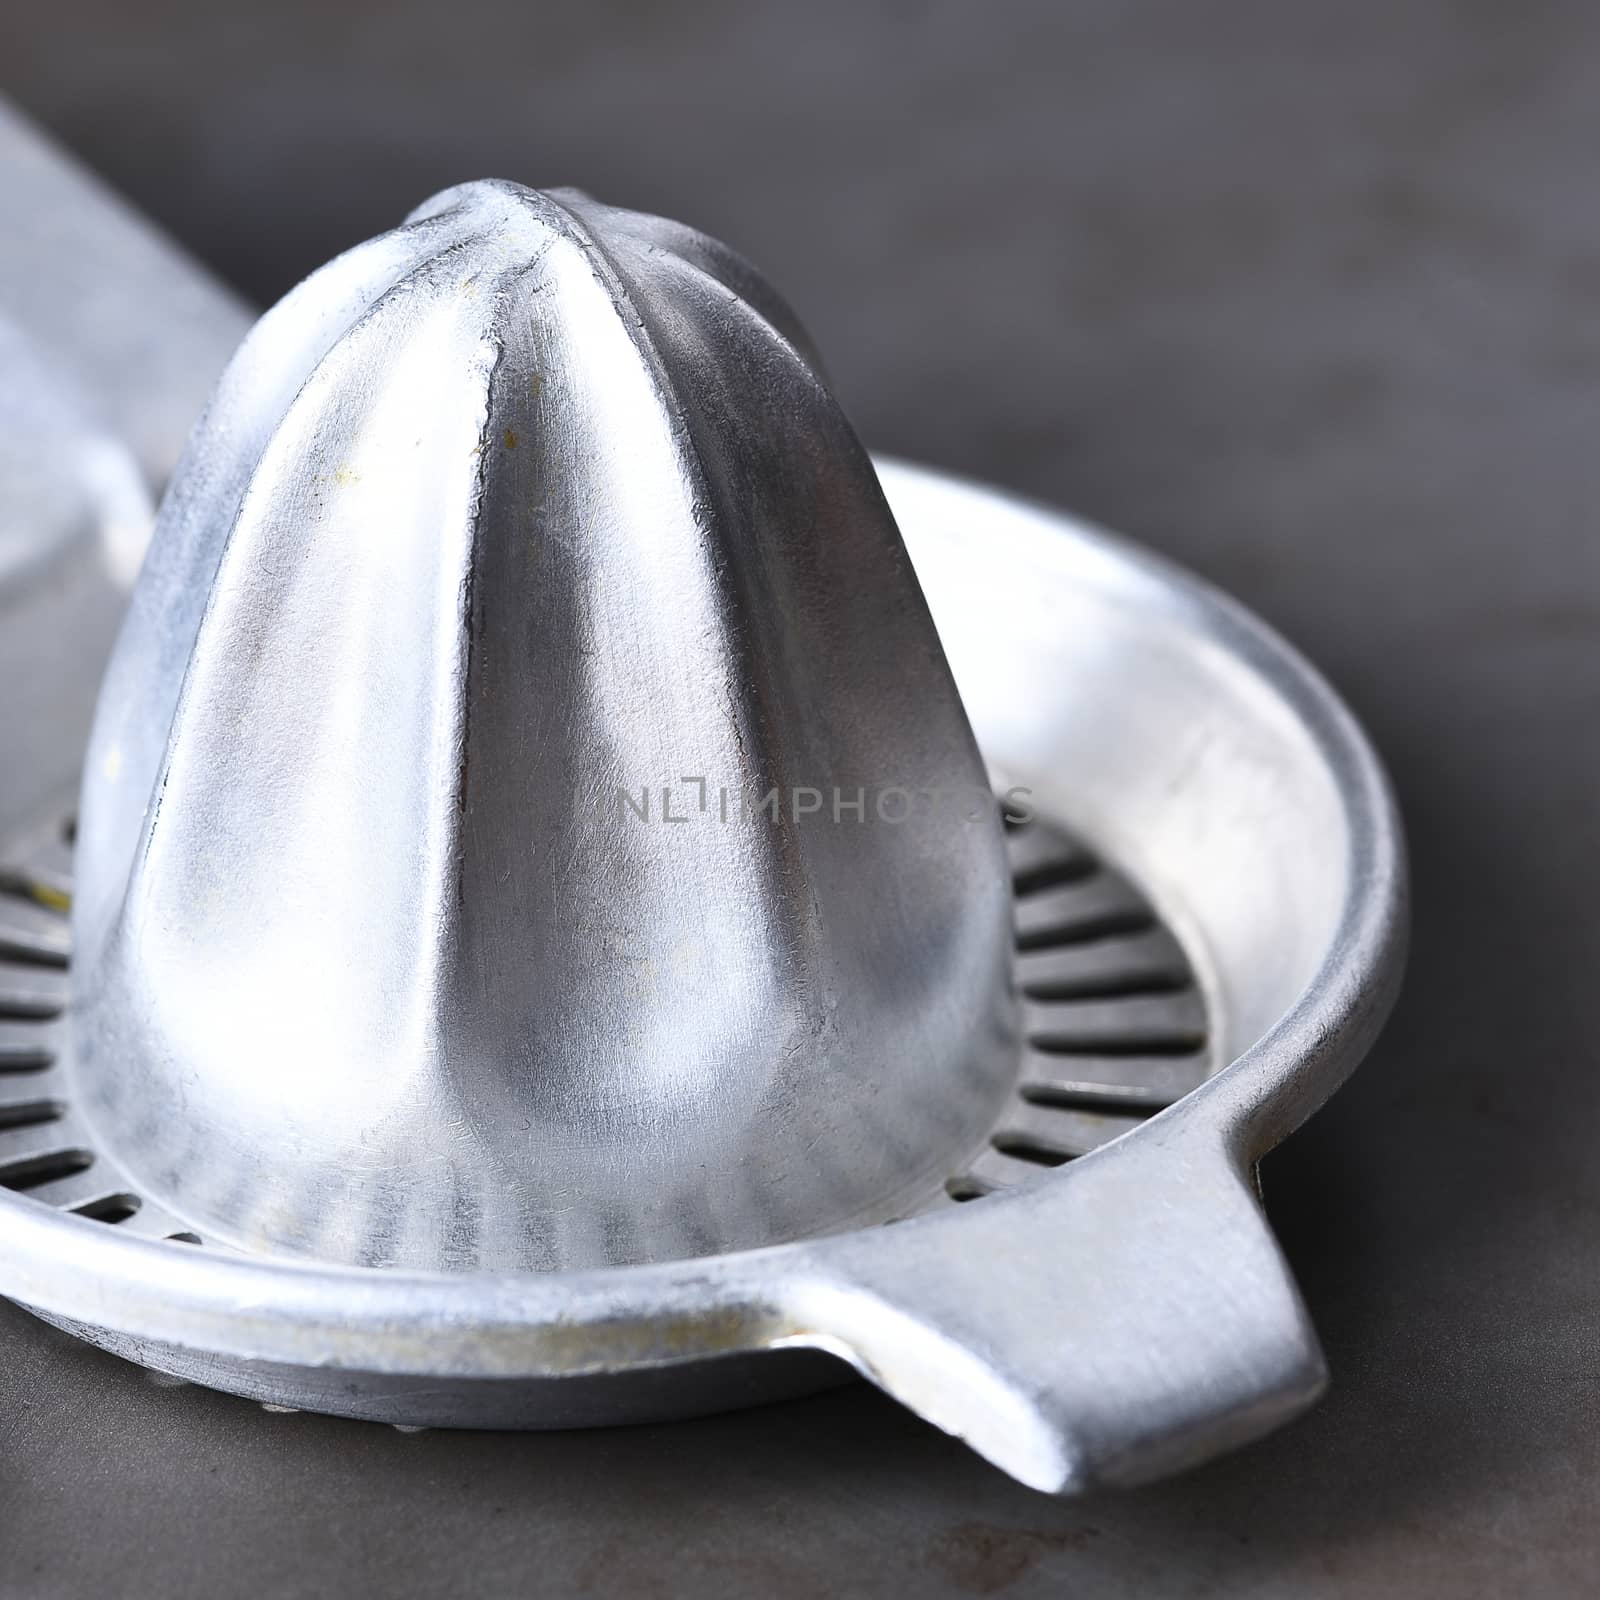 Closeup of an antique juicer. The shiny metal kitchen implement is on a gray metal surface.